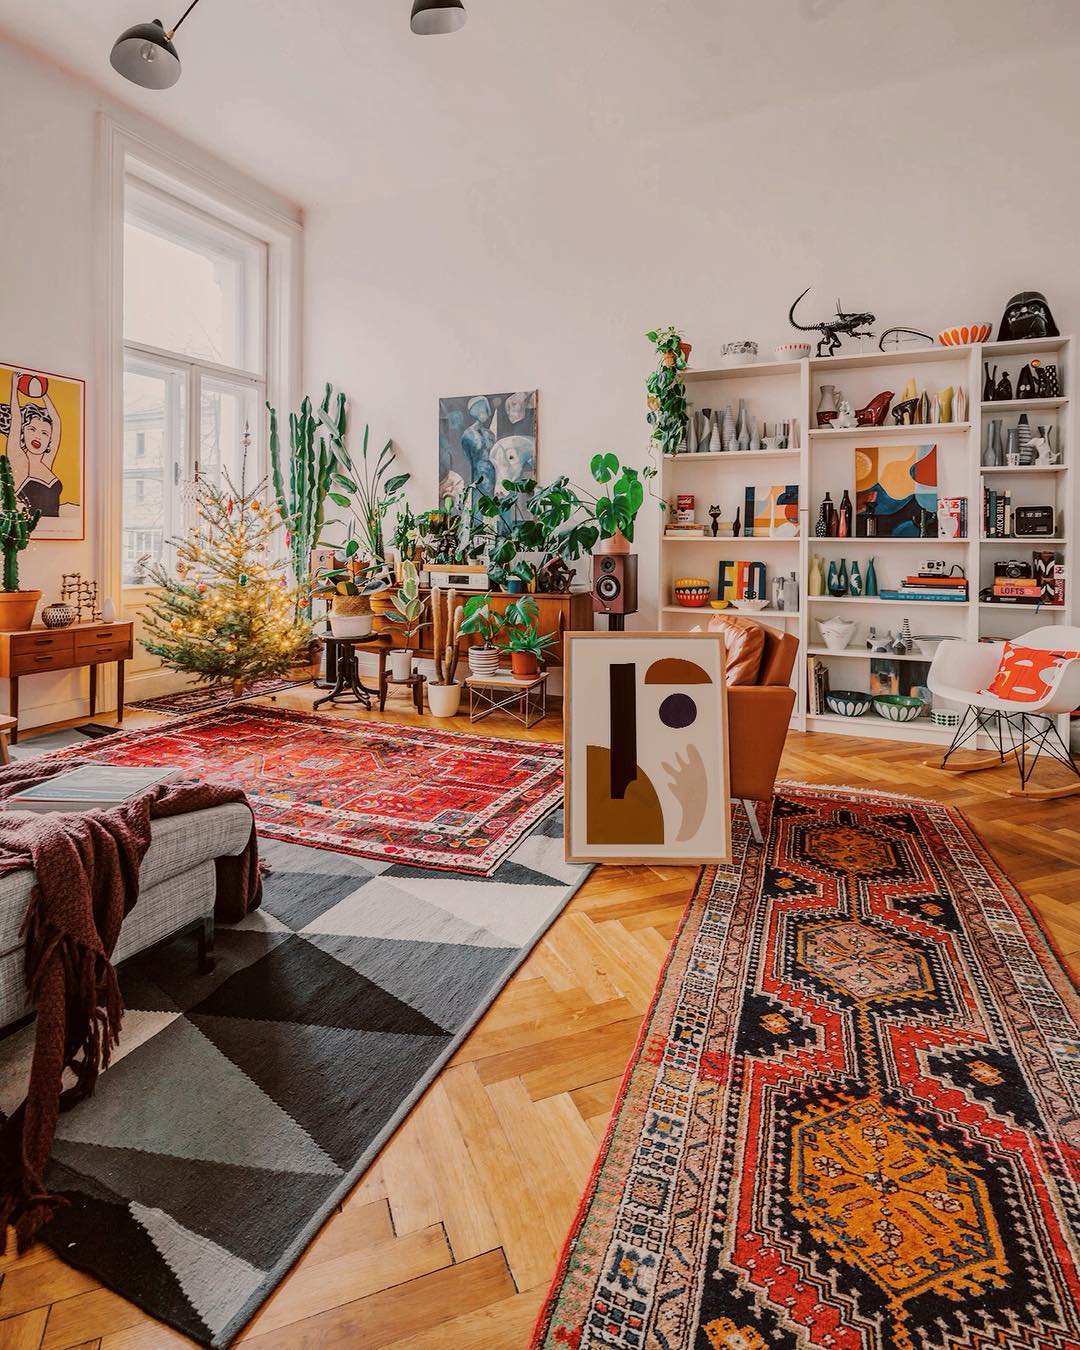 The Best Interior Design Trends to Try in 2019 - My Daily Magazine ...